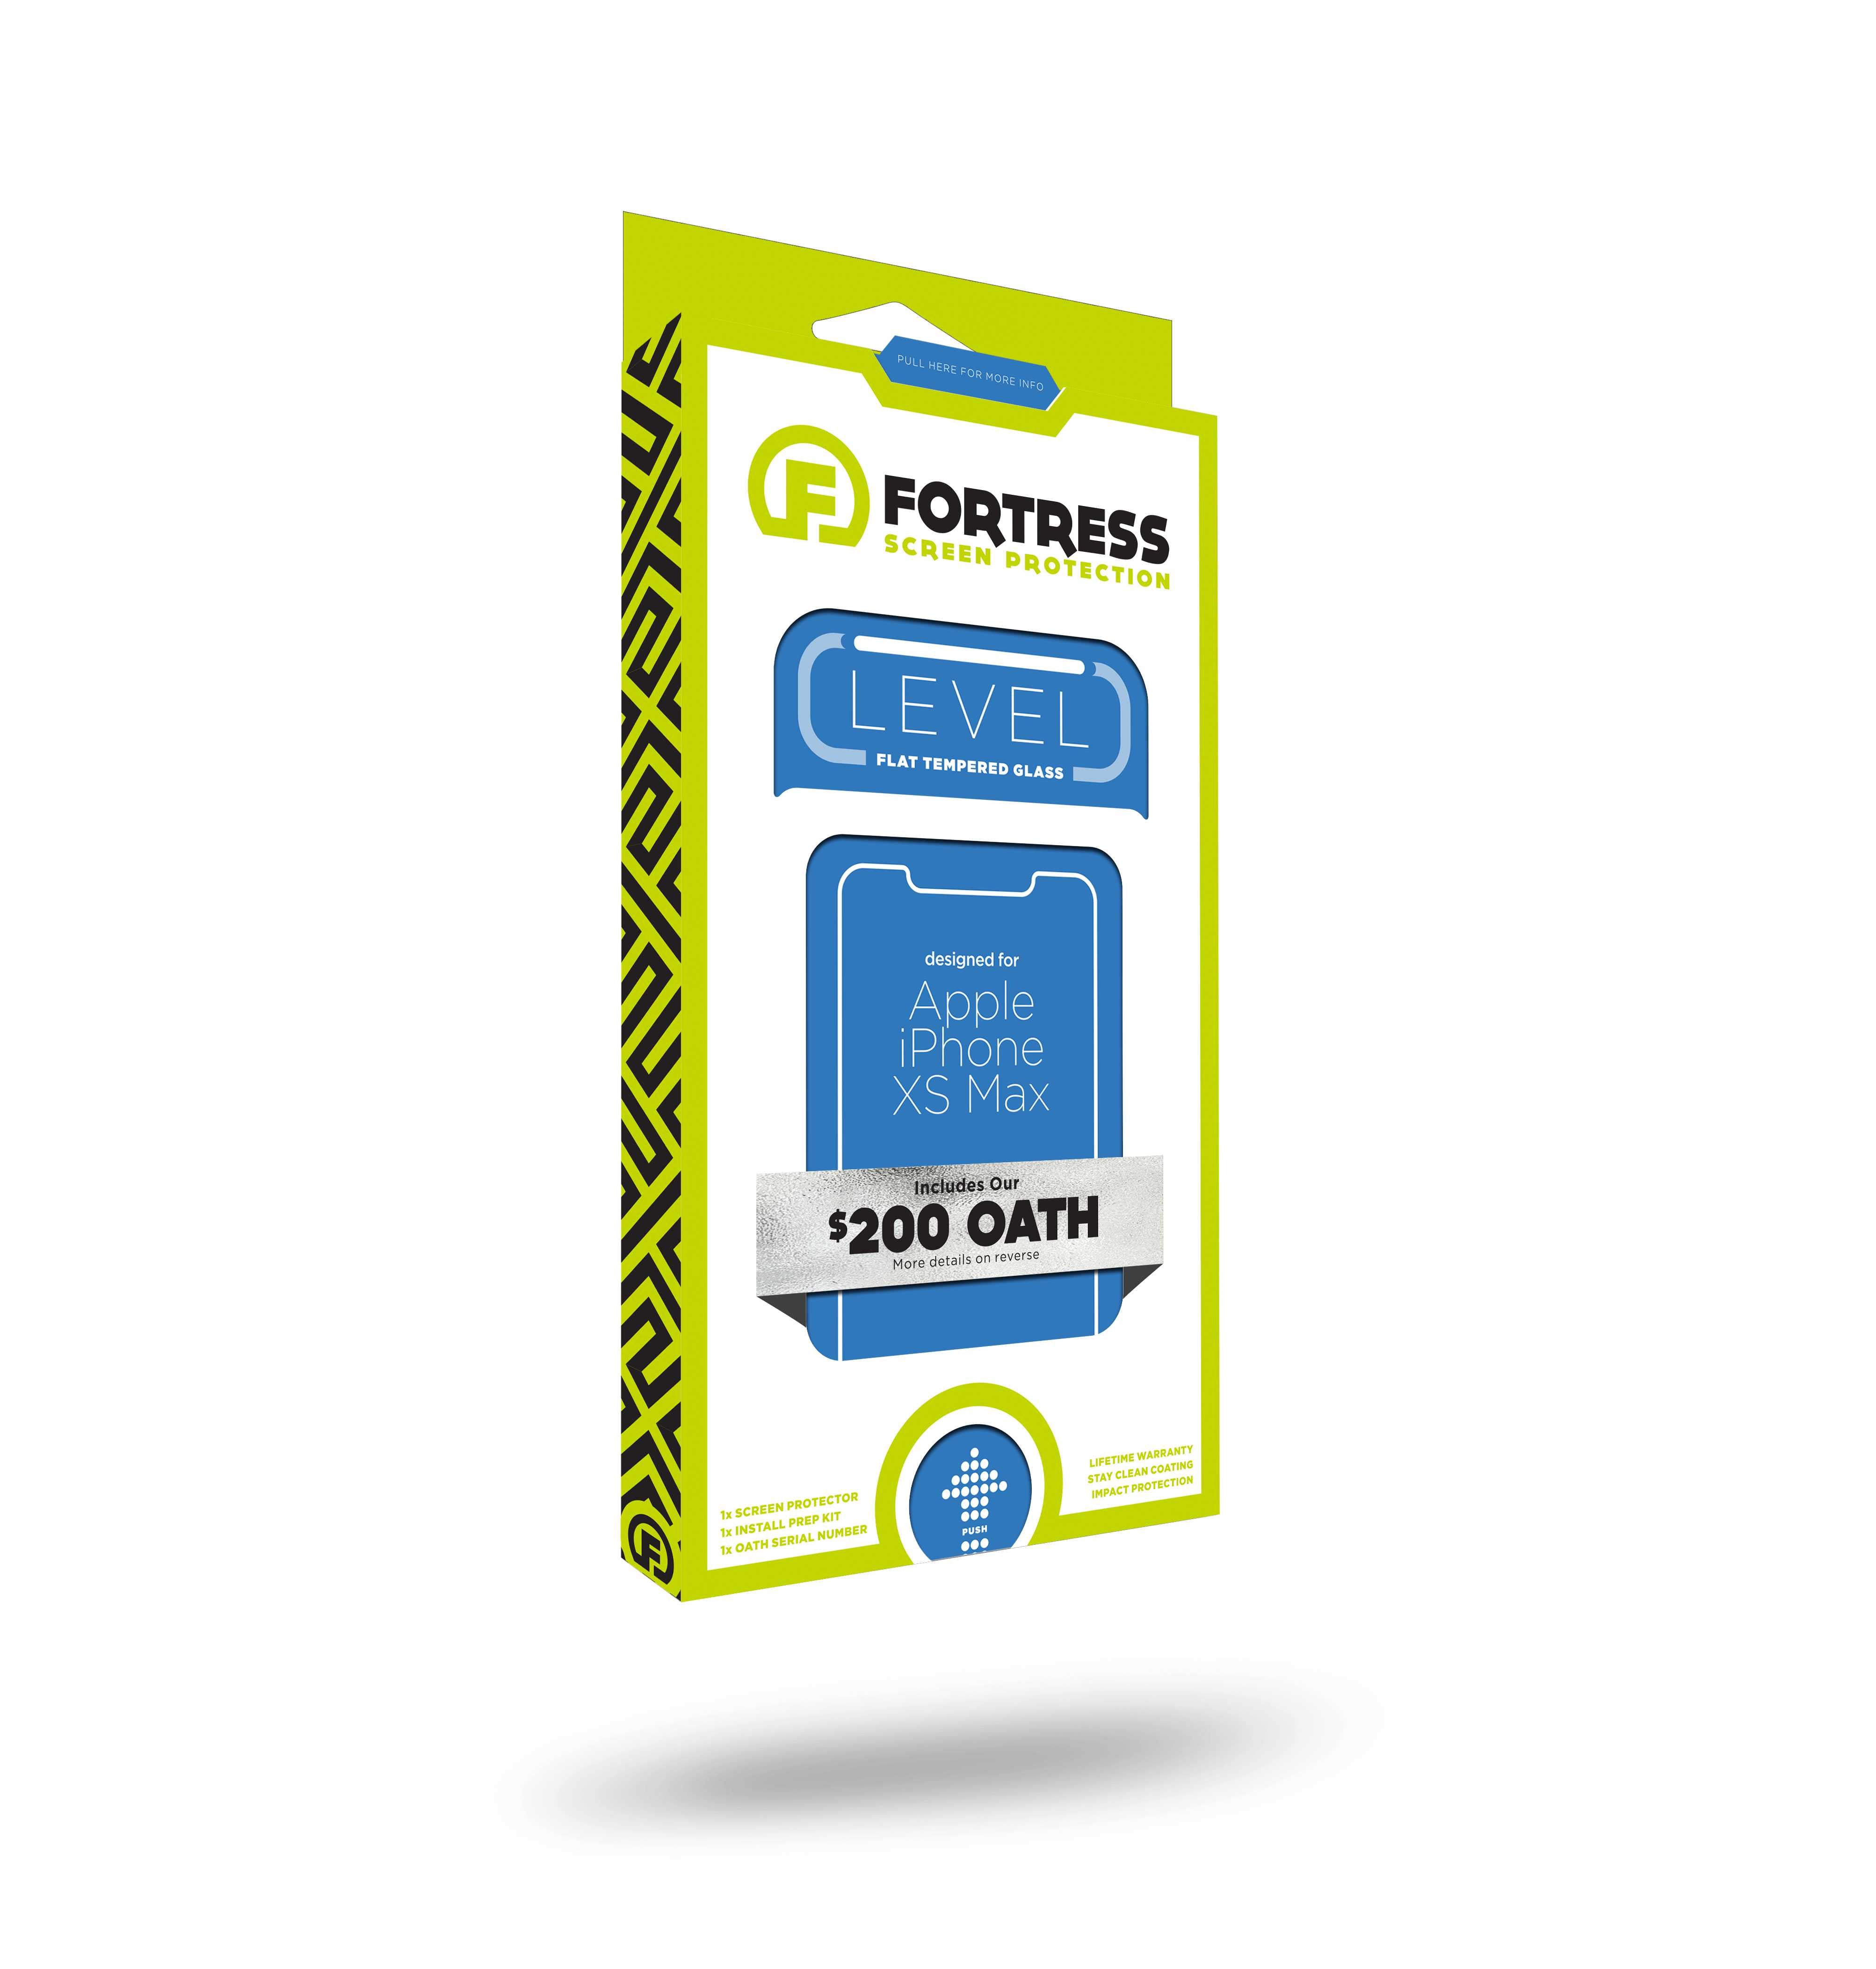 Fortress iPhone 12 Pro Screen Protector - $200 Device Coverage  Scooch Screen Protector